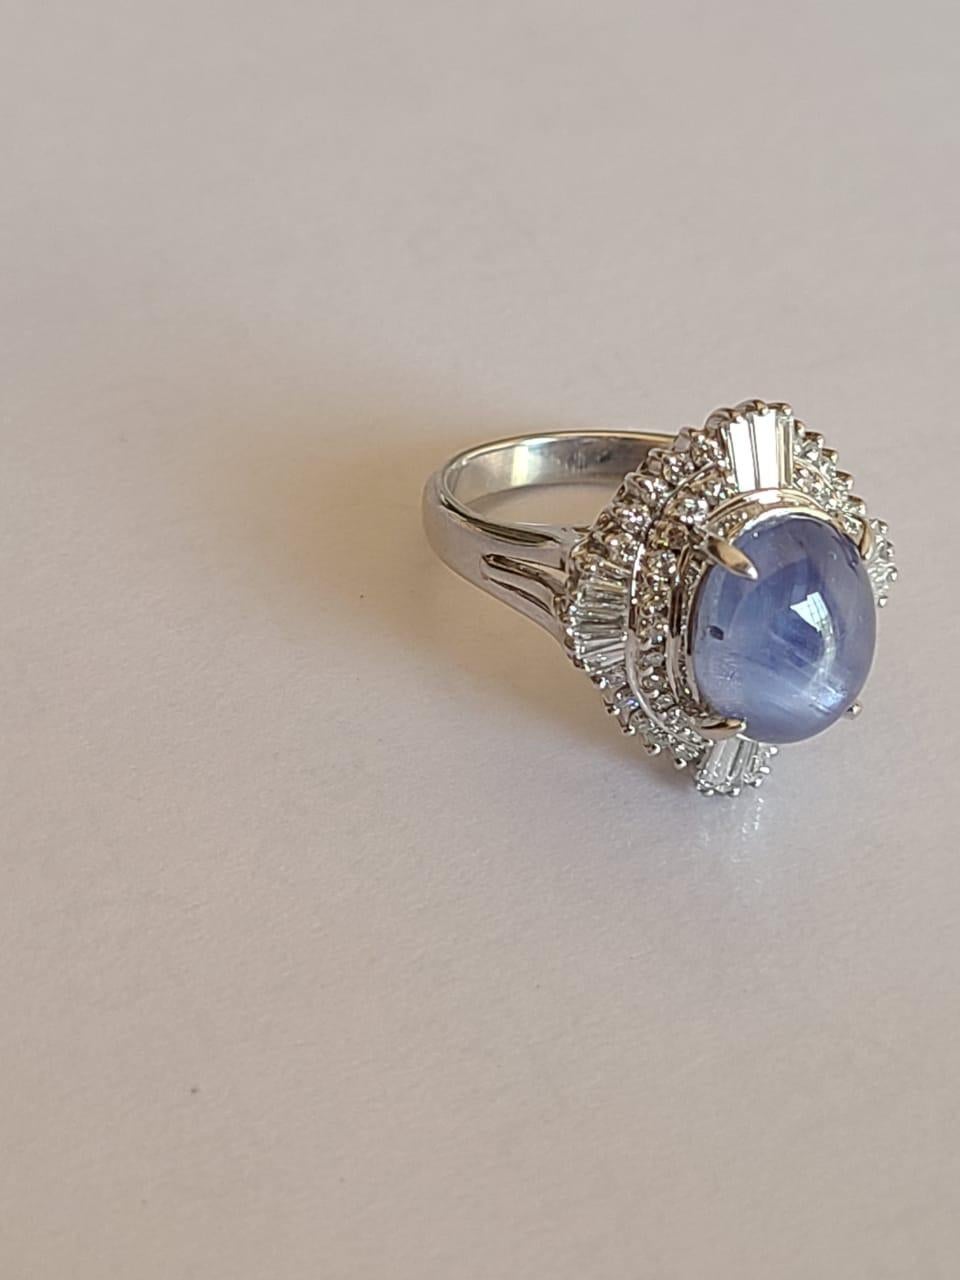 Oval Cut 8.90 Carat Natural Star Sapphire Ring Set in Platinum with Diamonds